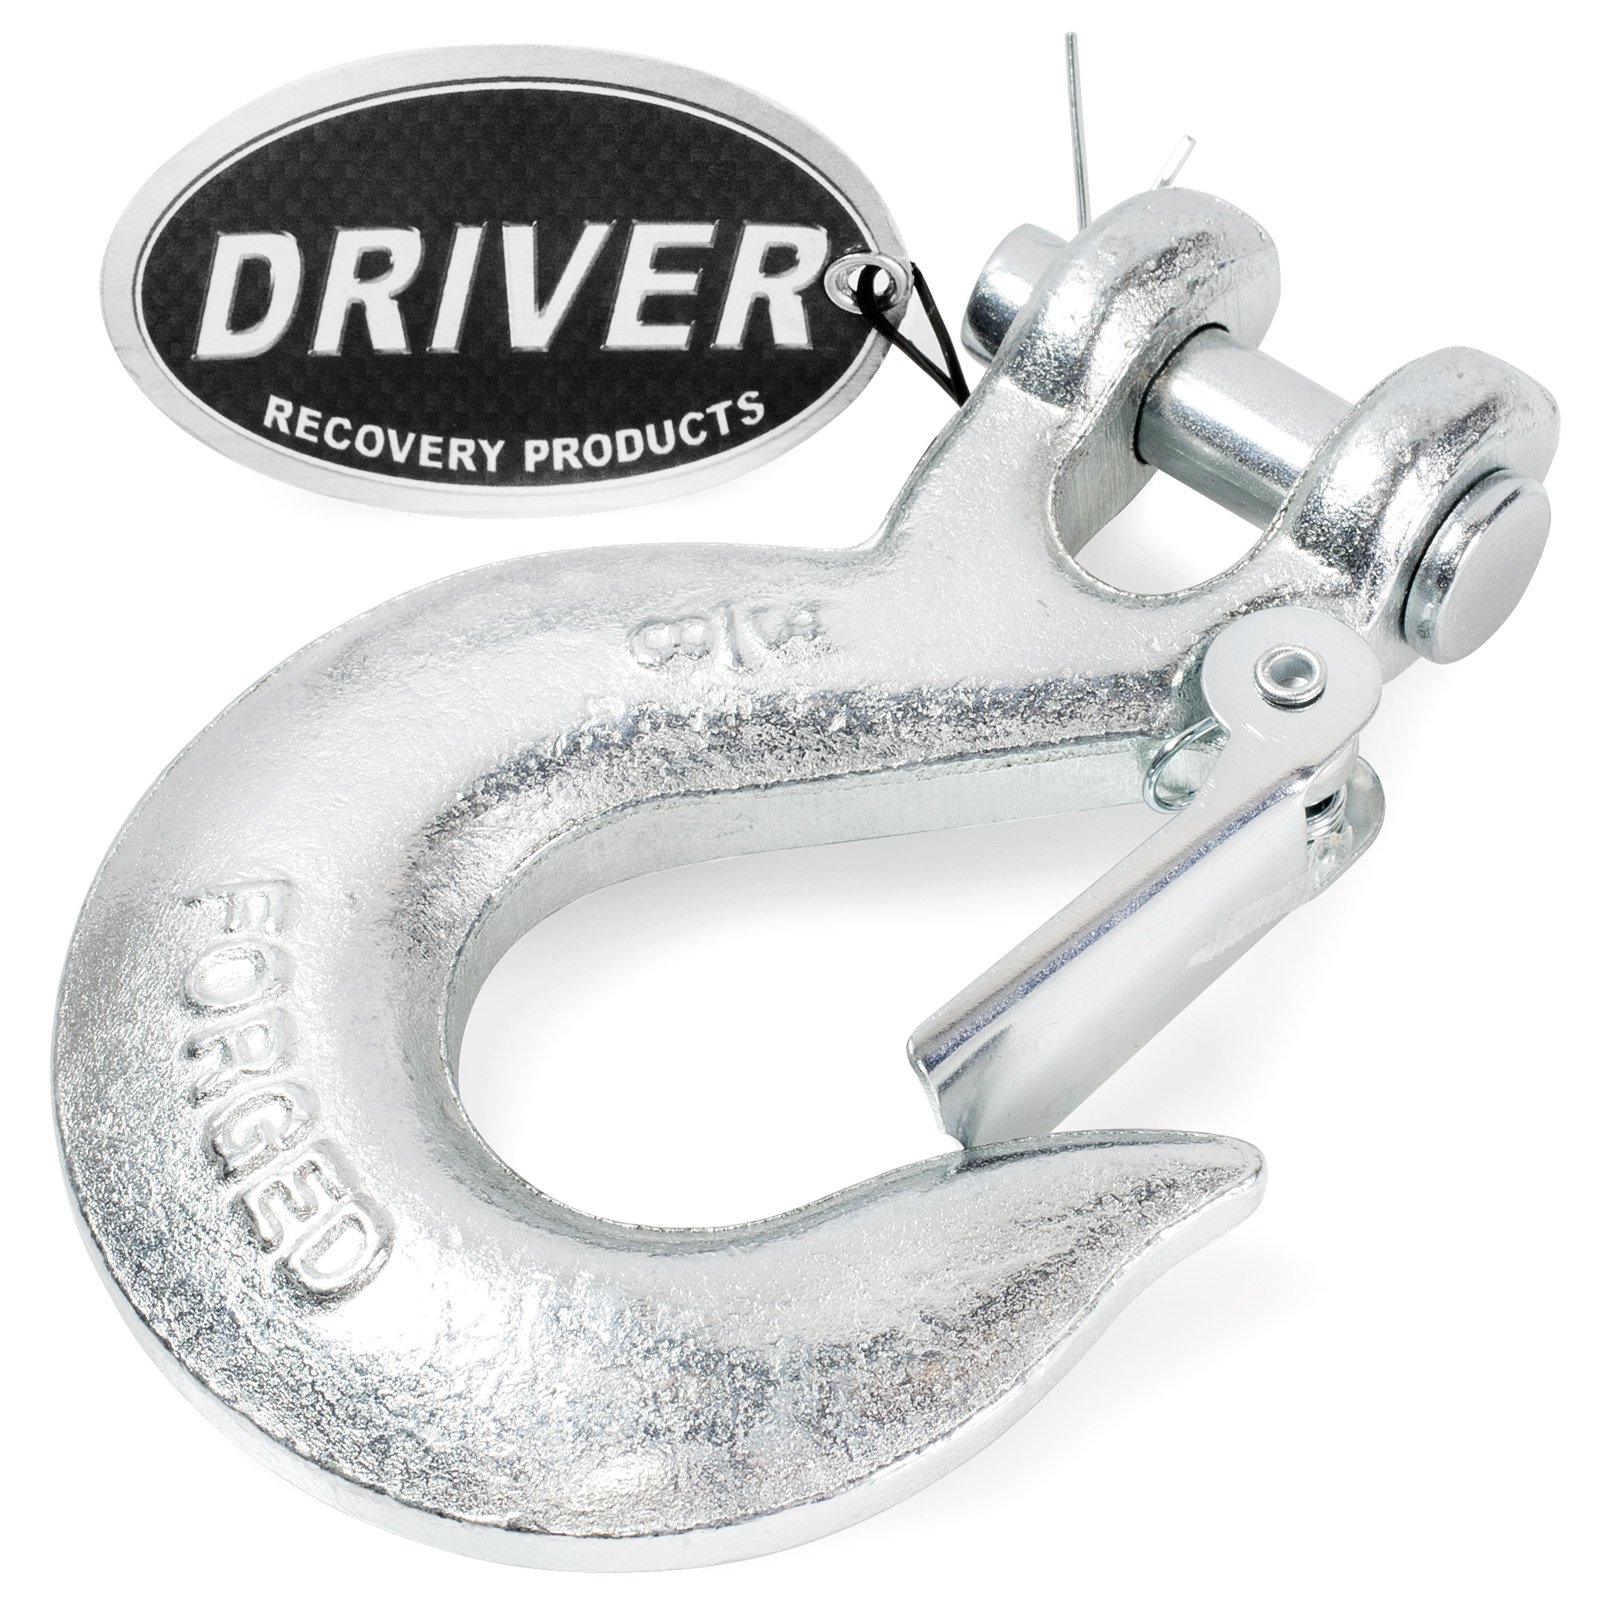 Driver Recovery Products 3/8" Clevis Slip Hook with Safety Latch Heavy Duty G70 Steel Towing Chain Winch